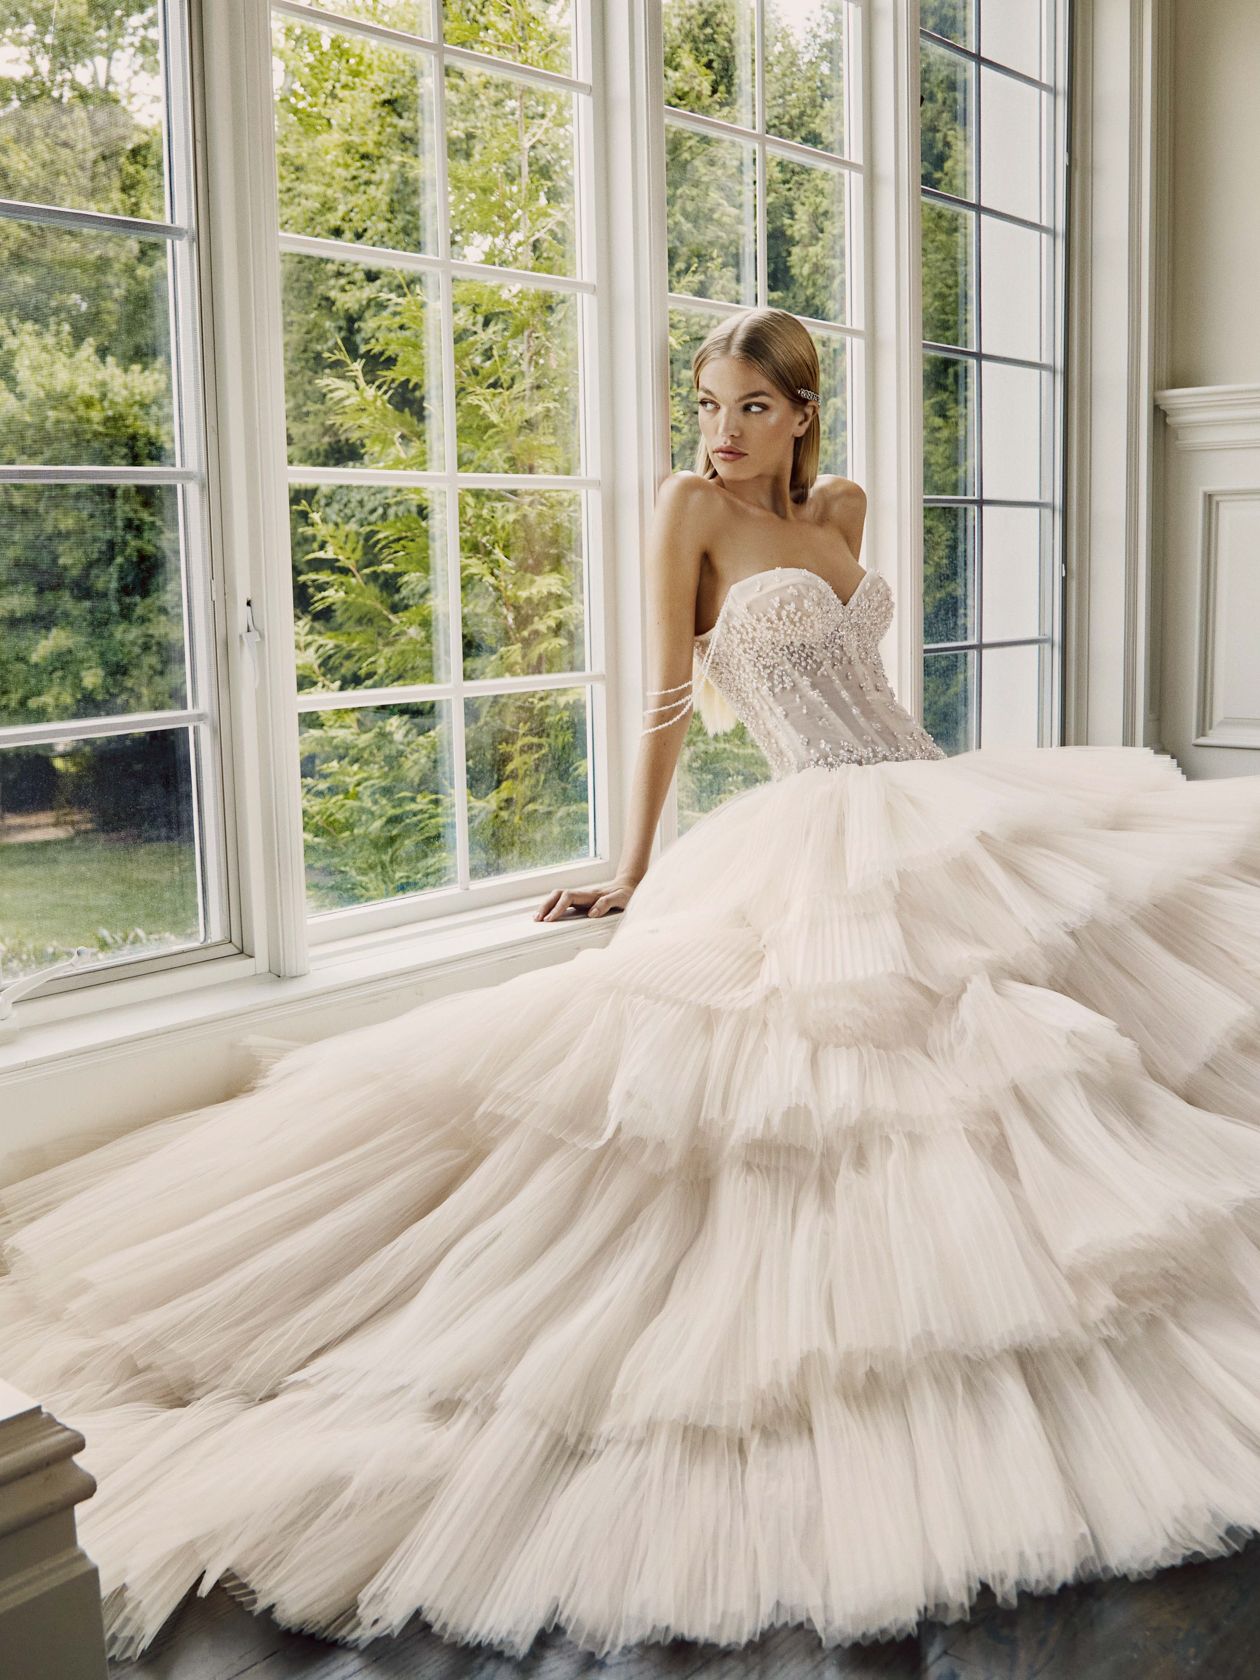 Couture Wedding Dresses & Luxury Apparel